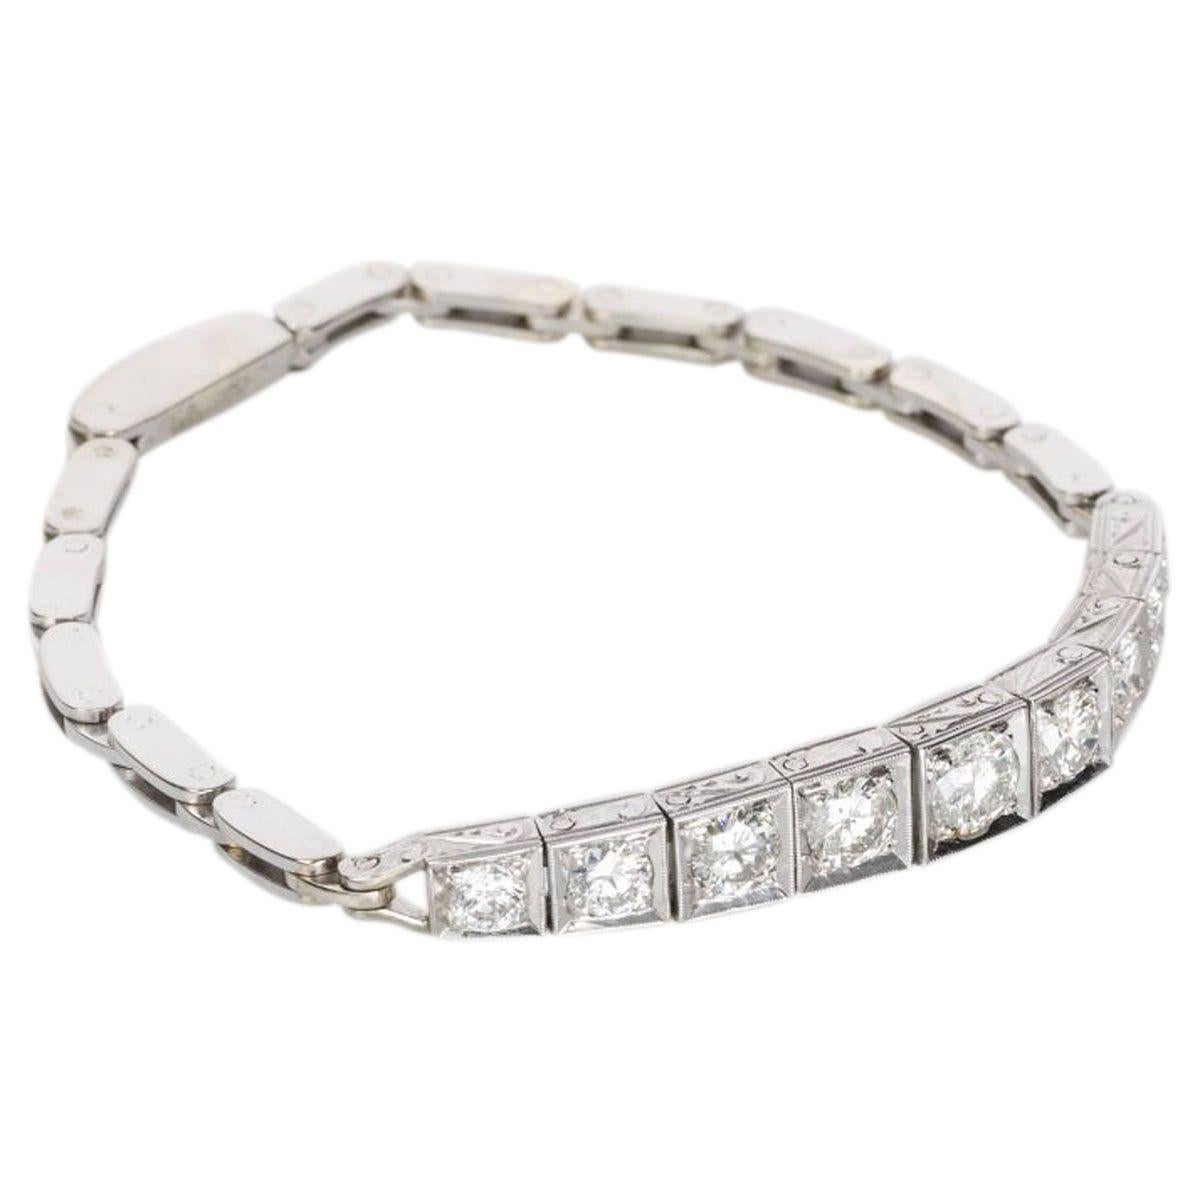 A beautiful bracelet that is great for everyday wear and will never go out of style. Set in the Art Deco fashion, this bracelet contains nine square grain set diamonds at the front with double row gate bracelet links to the back. The diamonds are